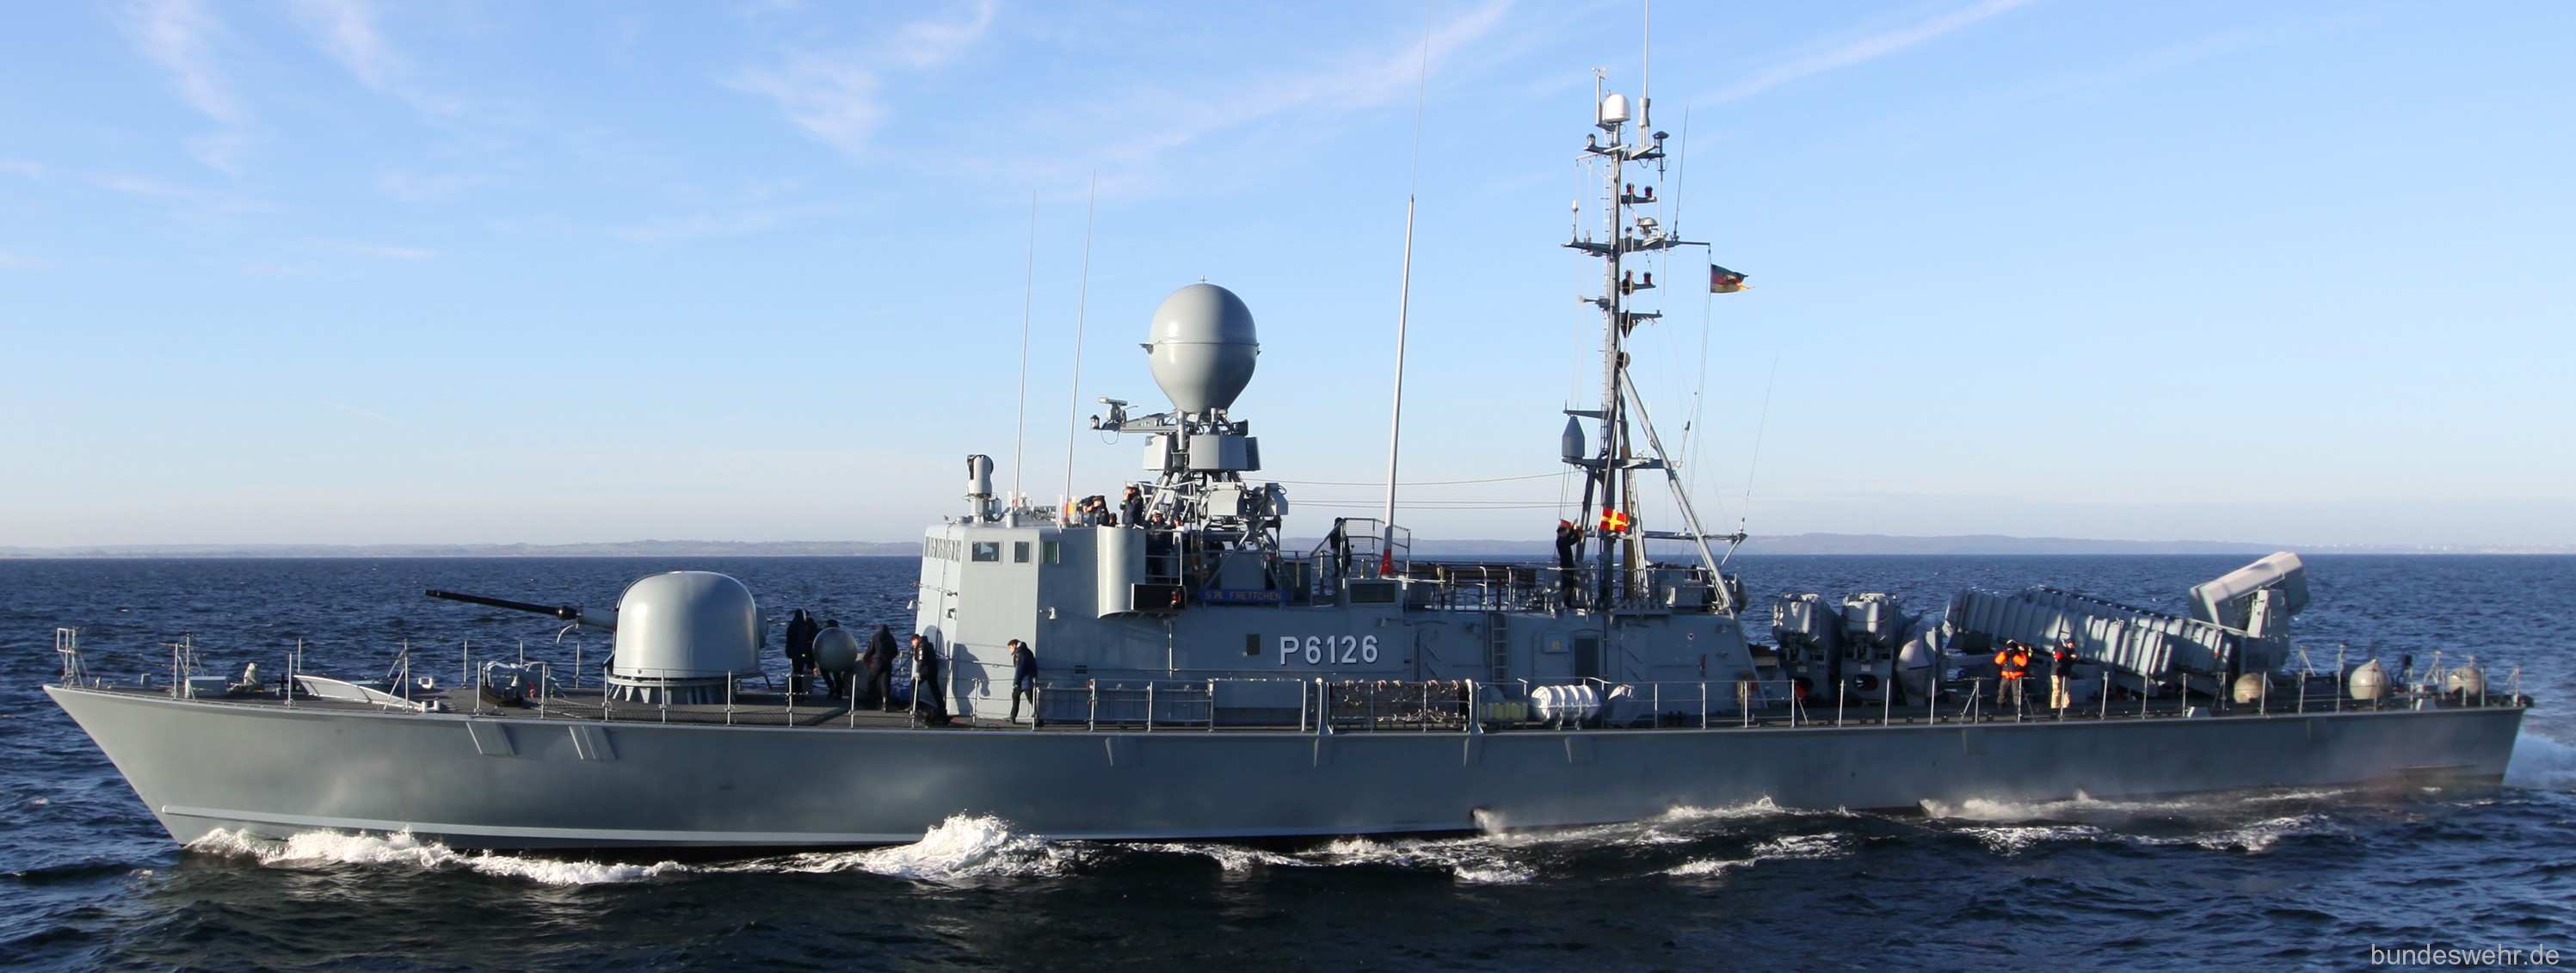 p6126 s76 fgs frettchen type 143a gepard class fast attack missile craft german navy 03